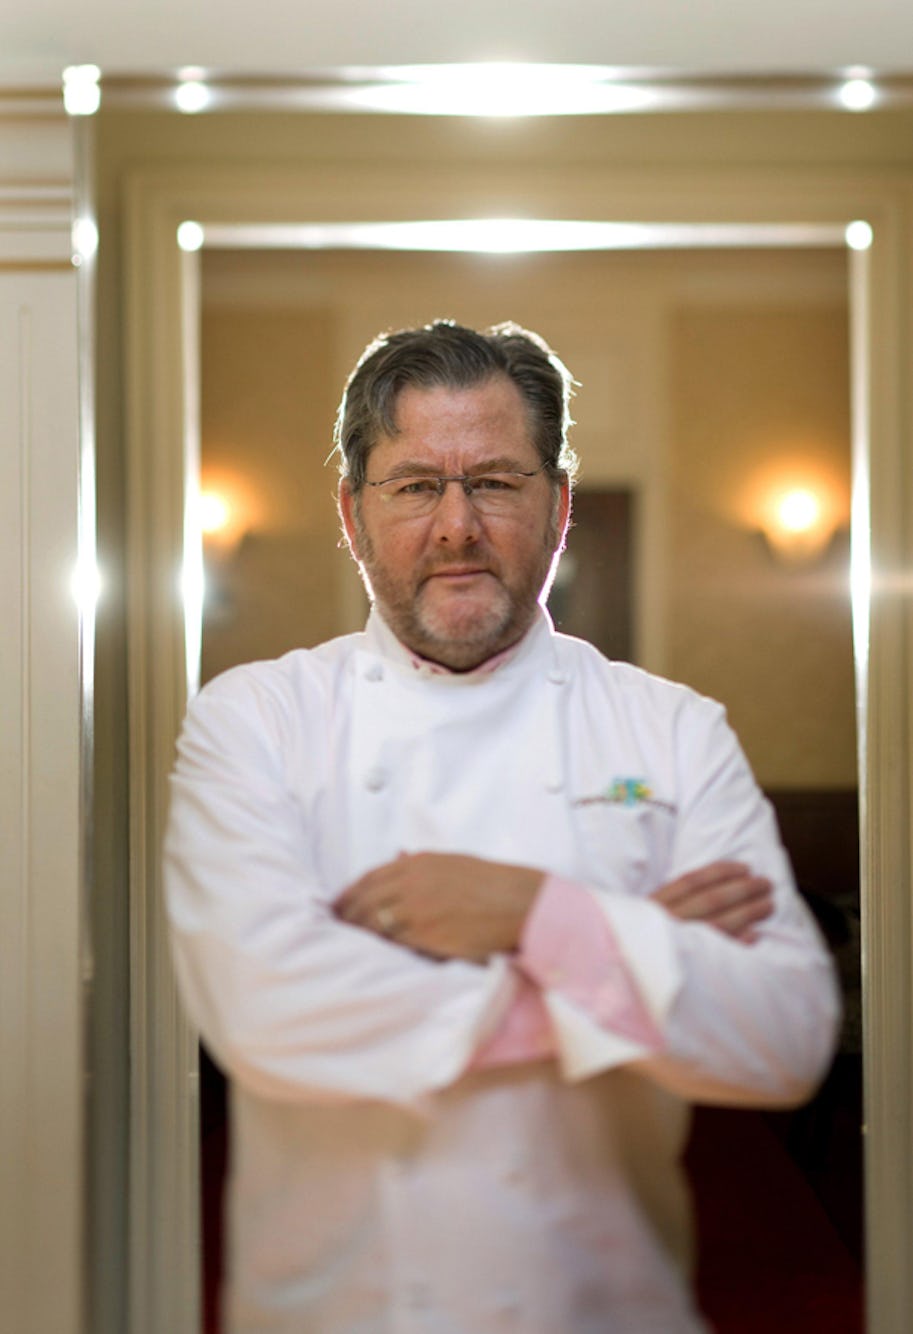 Chicago chef Charlie Trotter dies aged 54